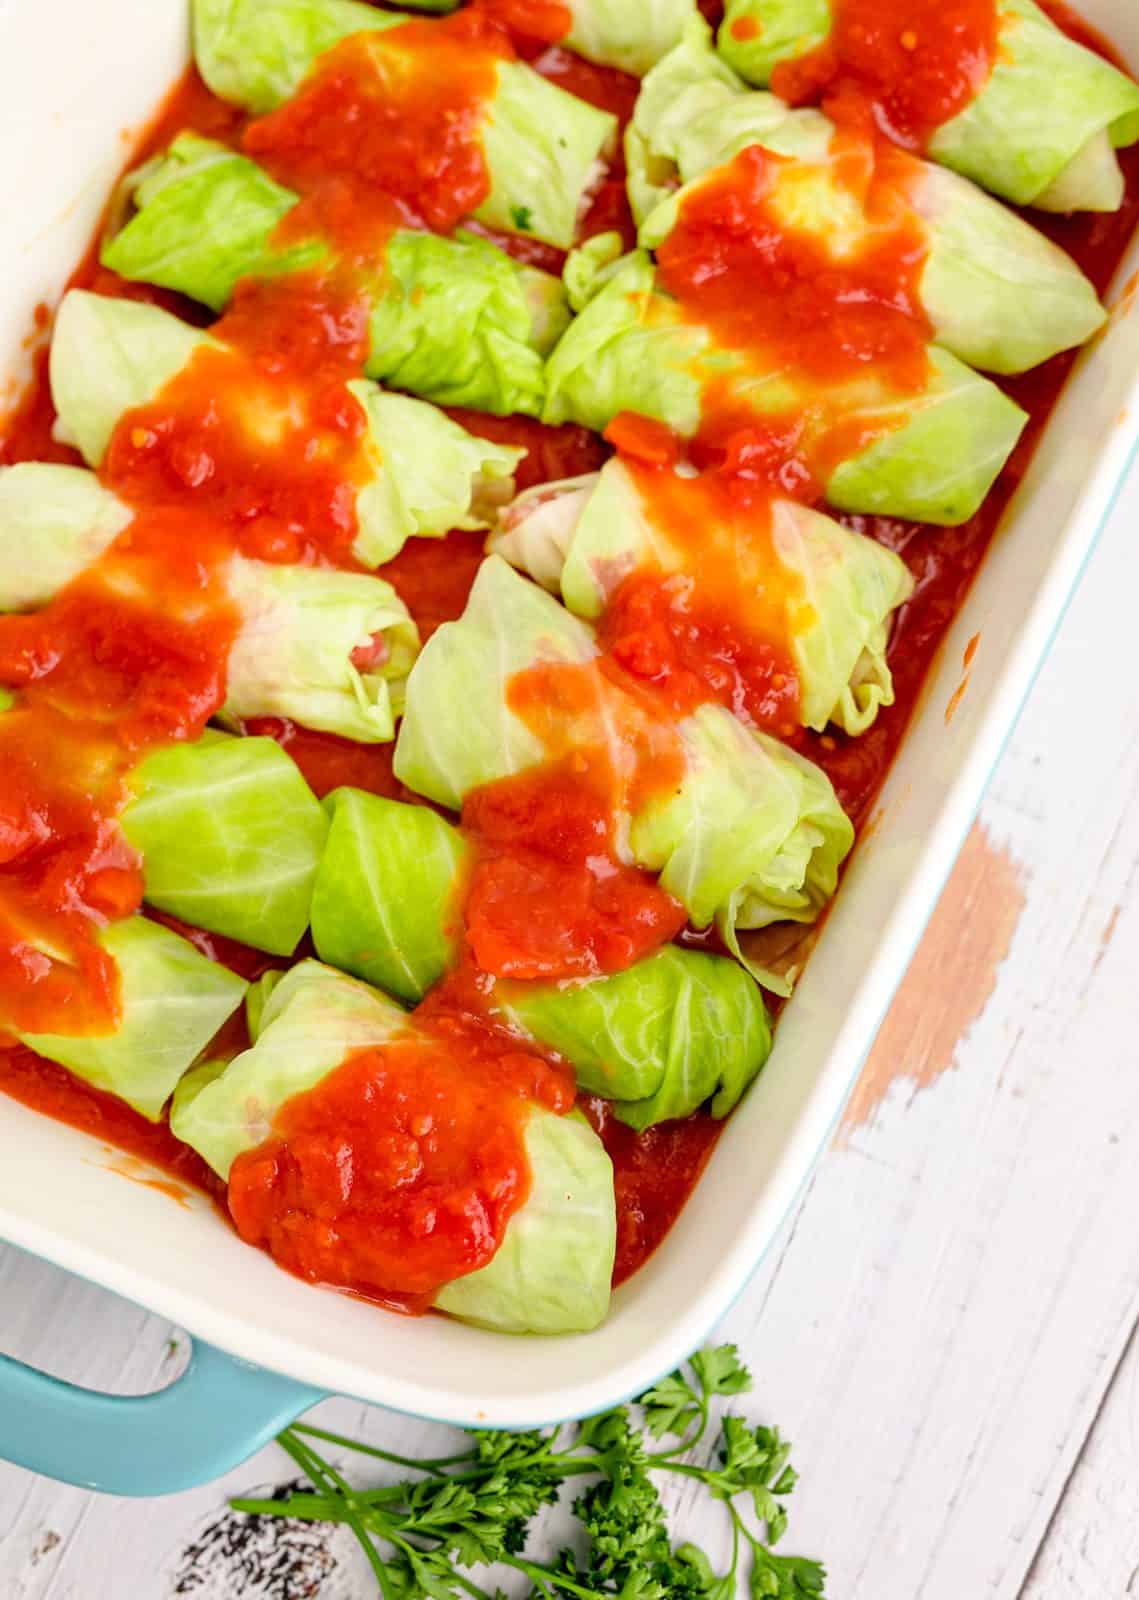 Cabbage rolls placed in baking dish and covered with remaining sauce.